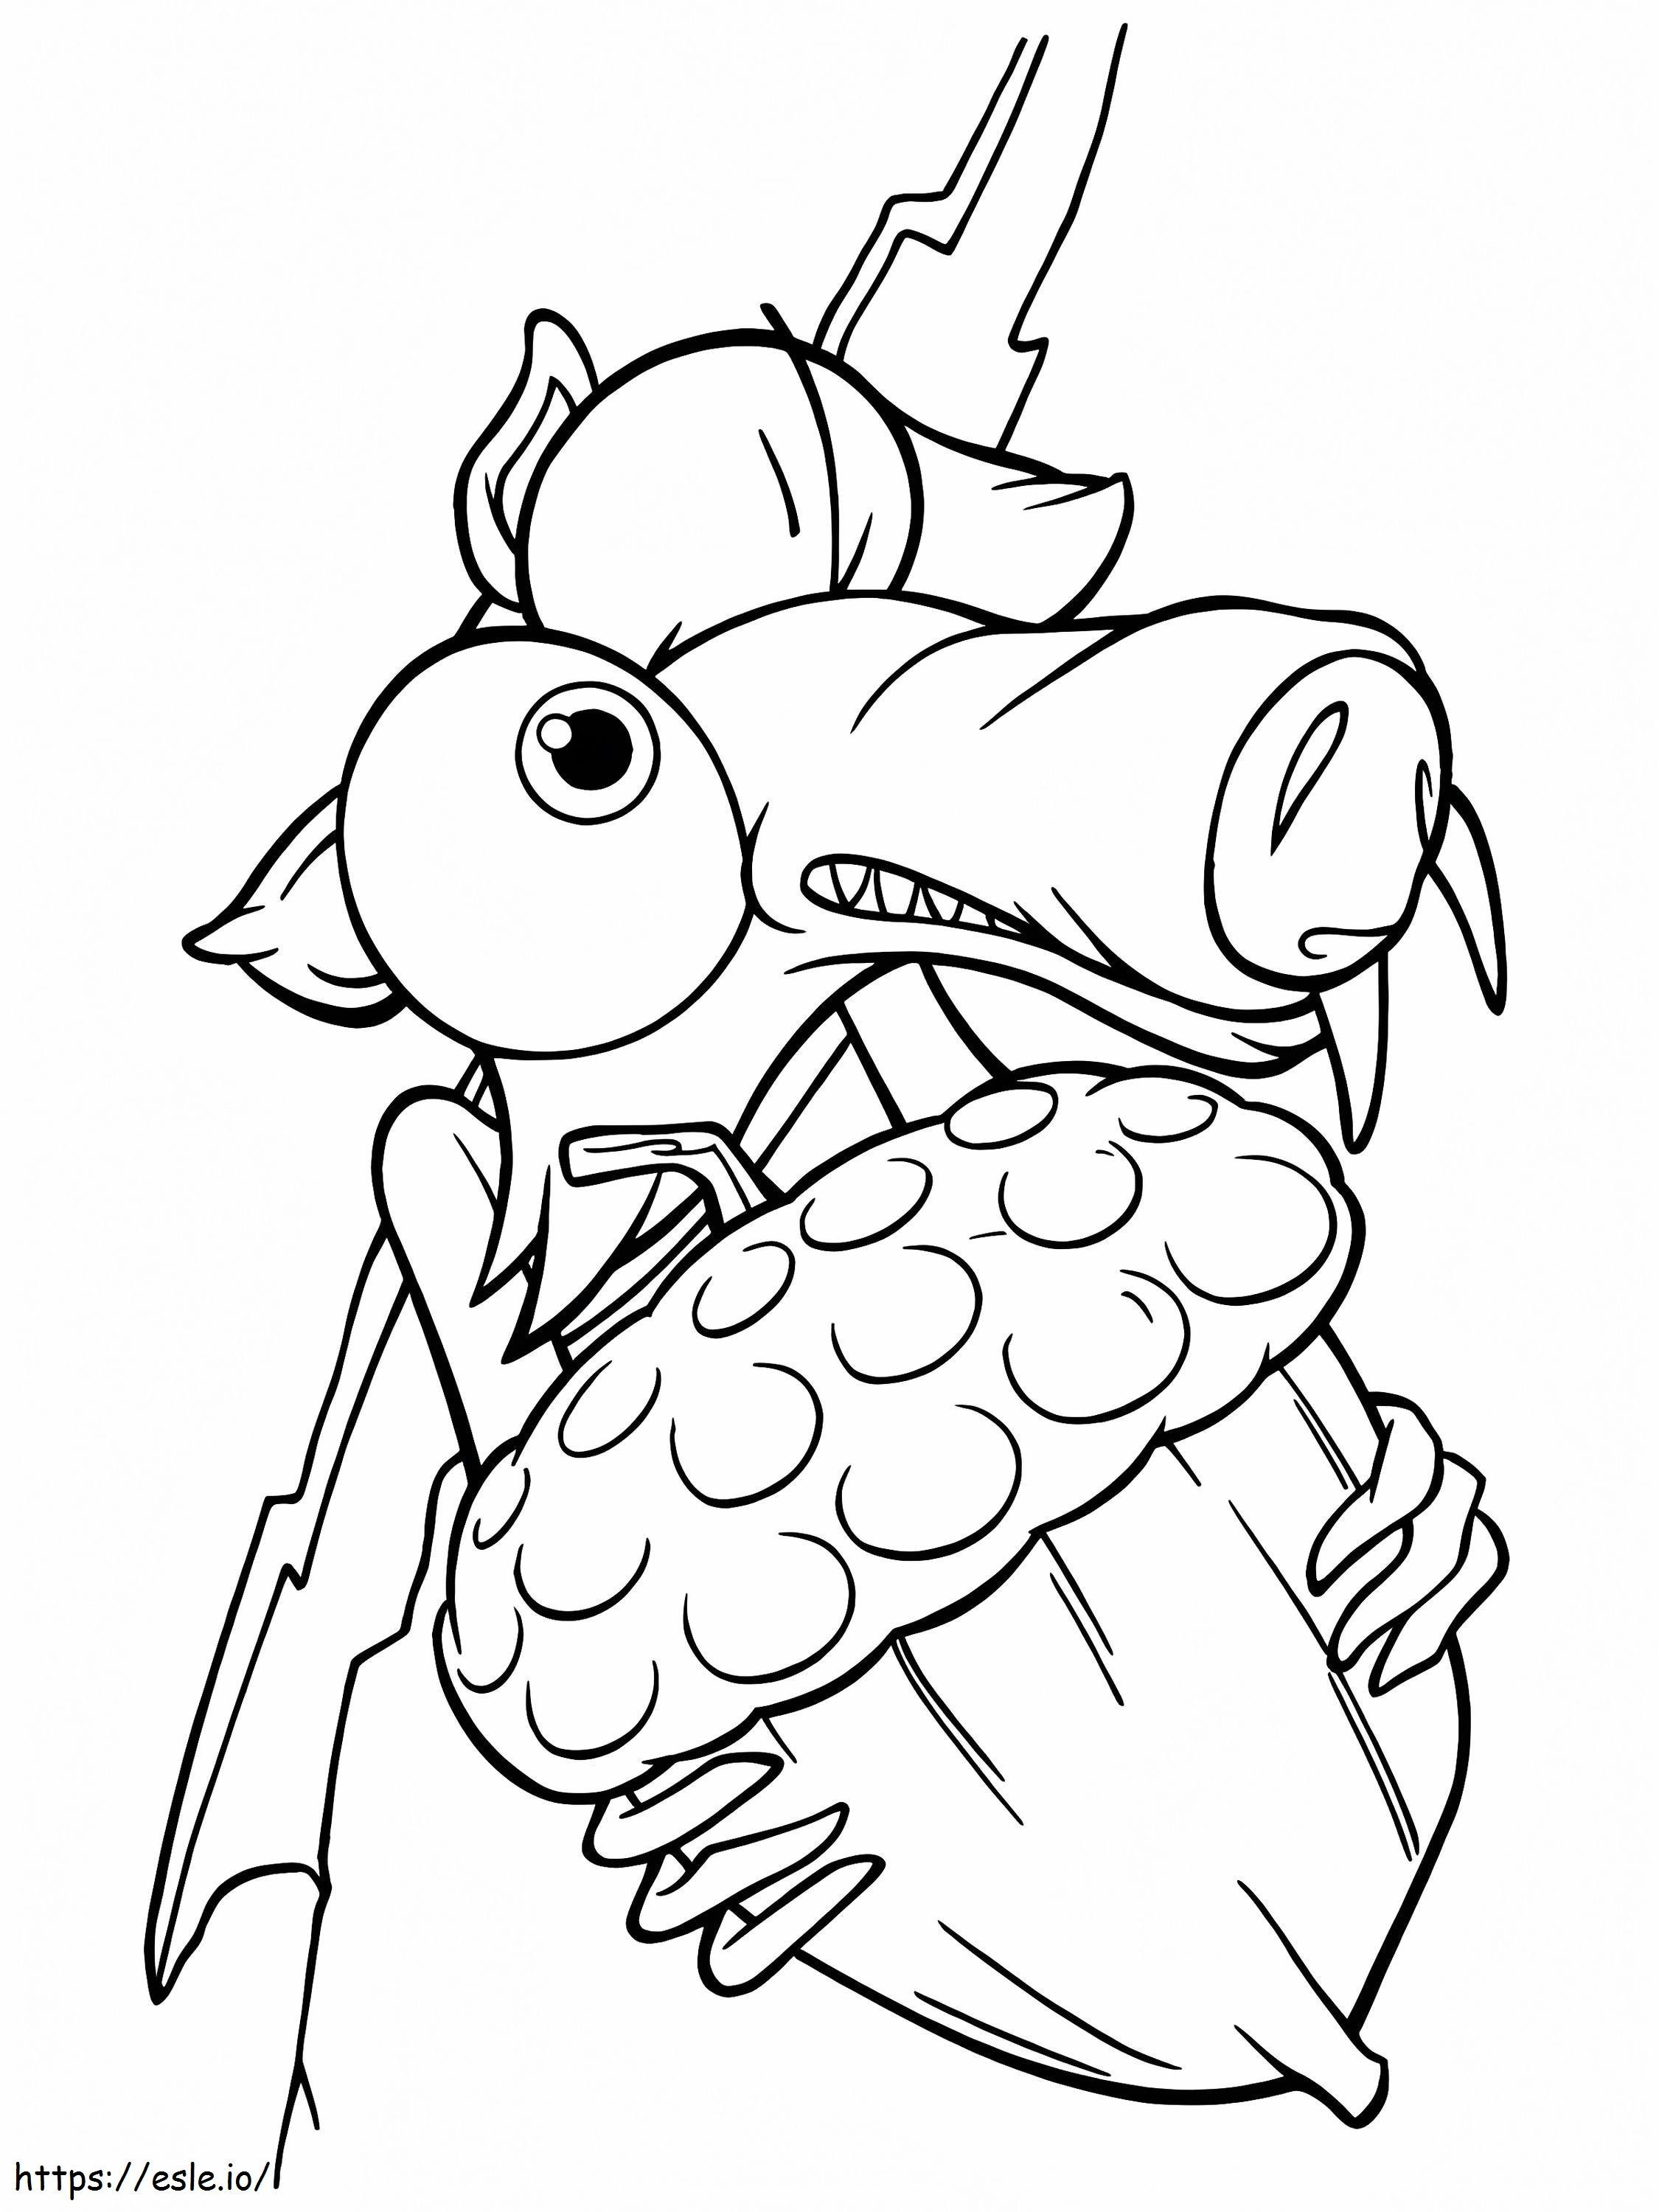 Scrat Holding Acorn coloring page